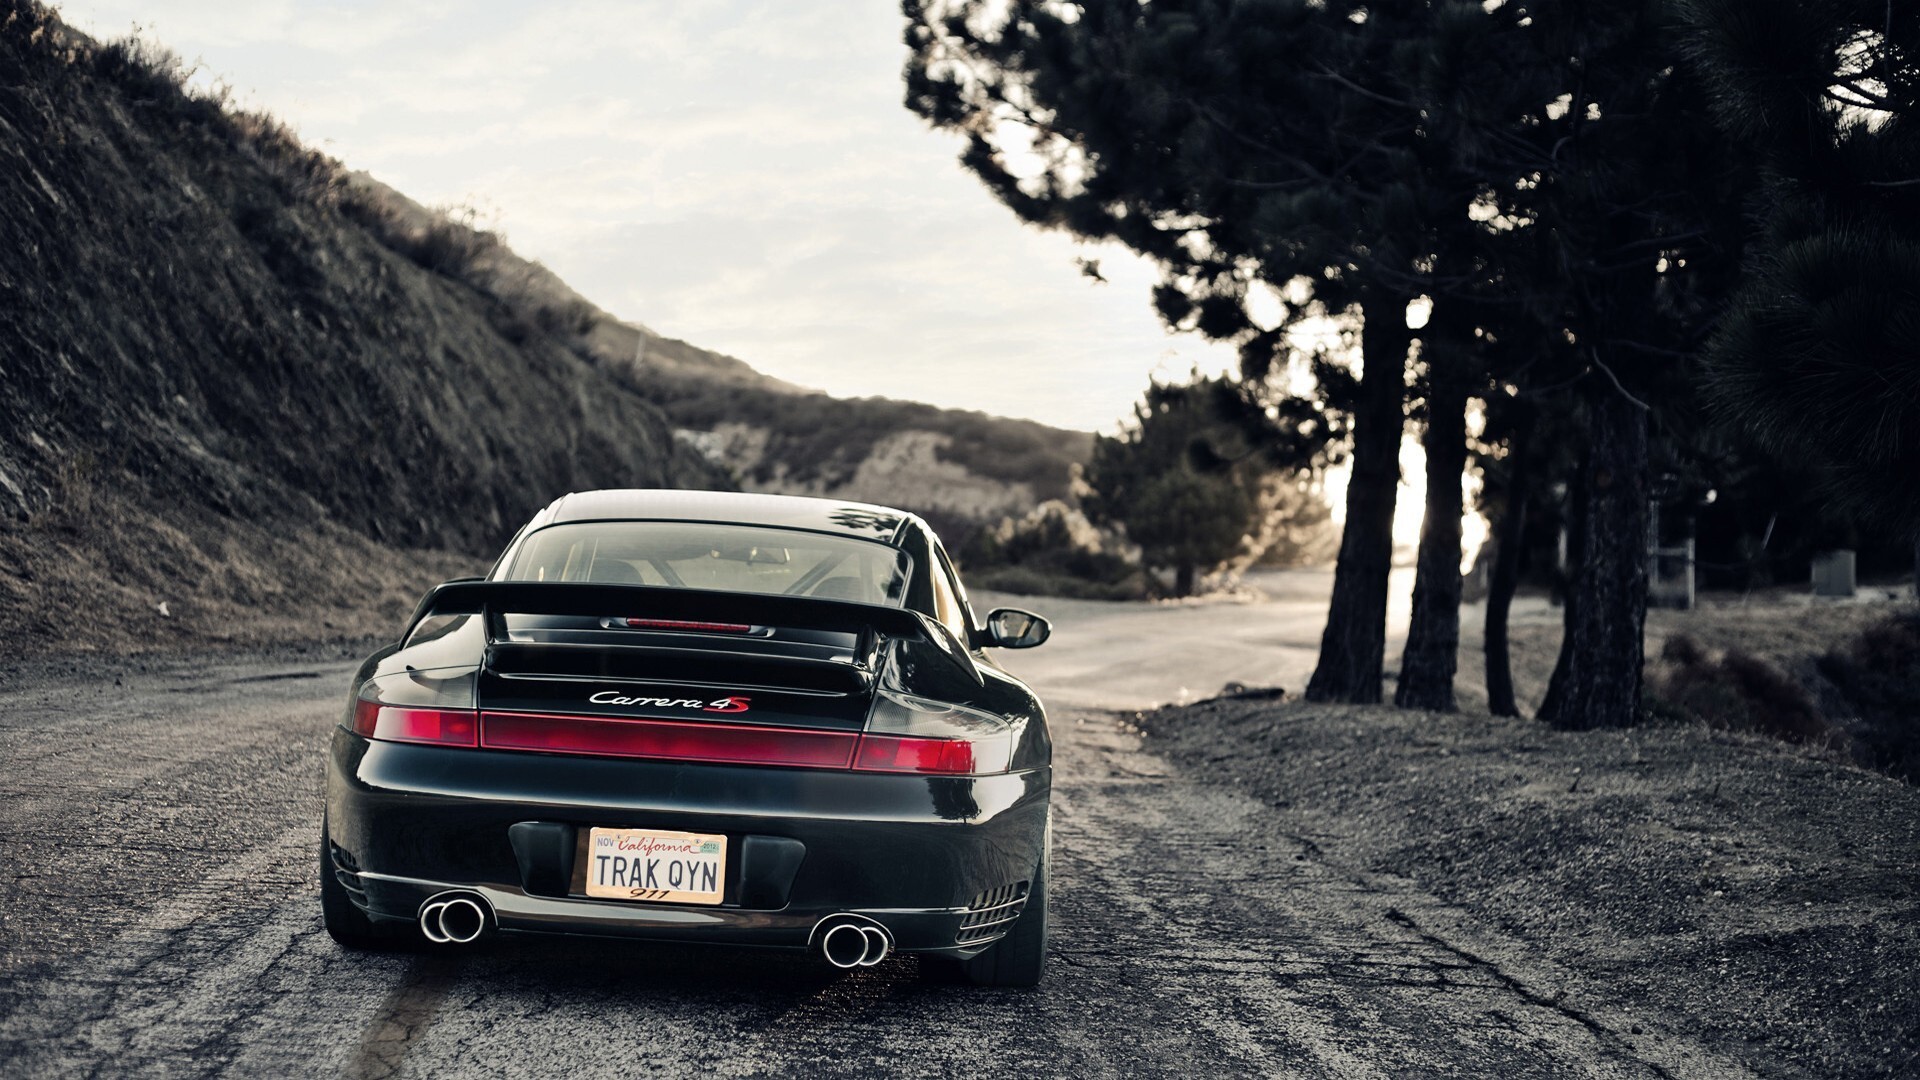 Porsche 911: Carrera 4S, The 997 GT2 has a twin-turbocharged 3.6-litre flat-6 engine. 1920x1080 Full HD Background.